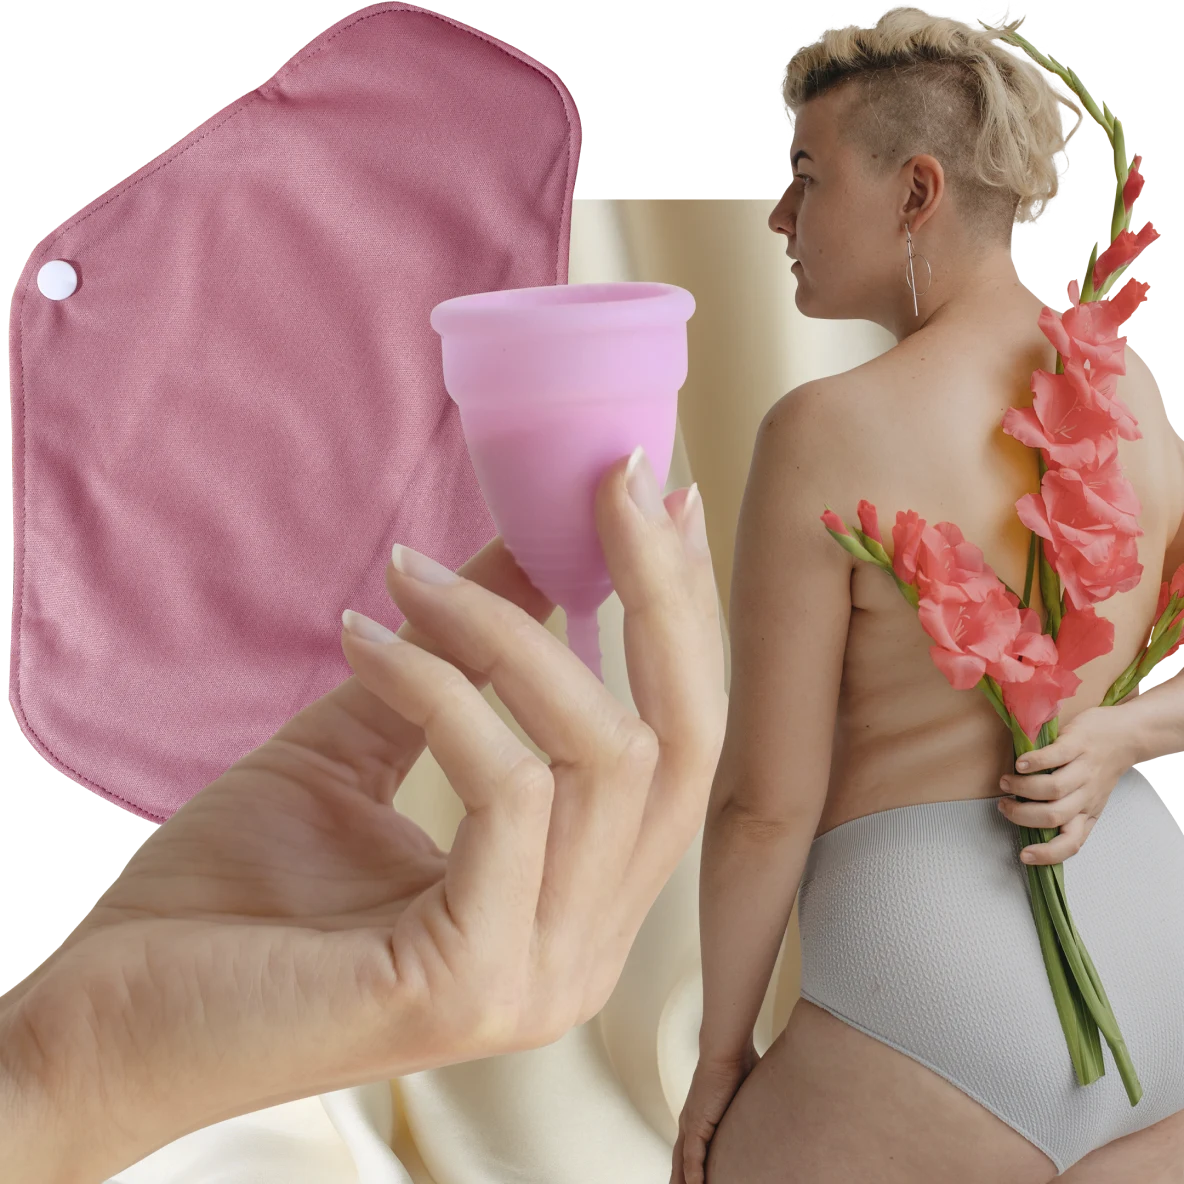 A white hand is holding a pink menstrual cup. A pink cloth pad is on the left. A white woman with short blonde hair holds pink flowers behind her back on the right.